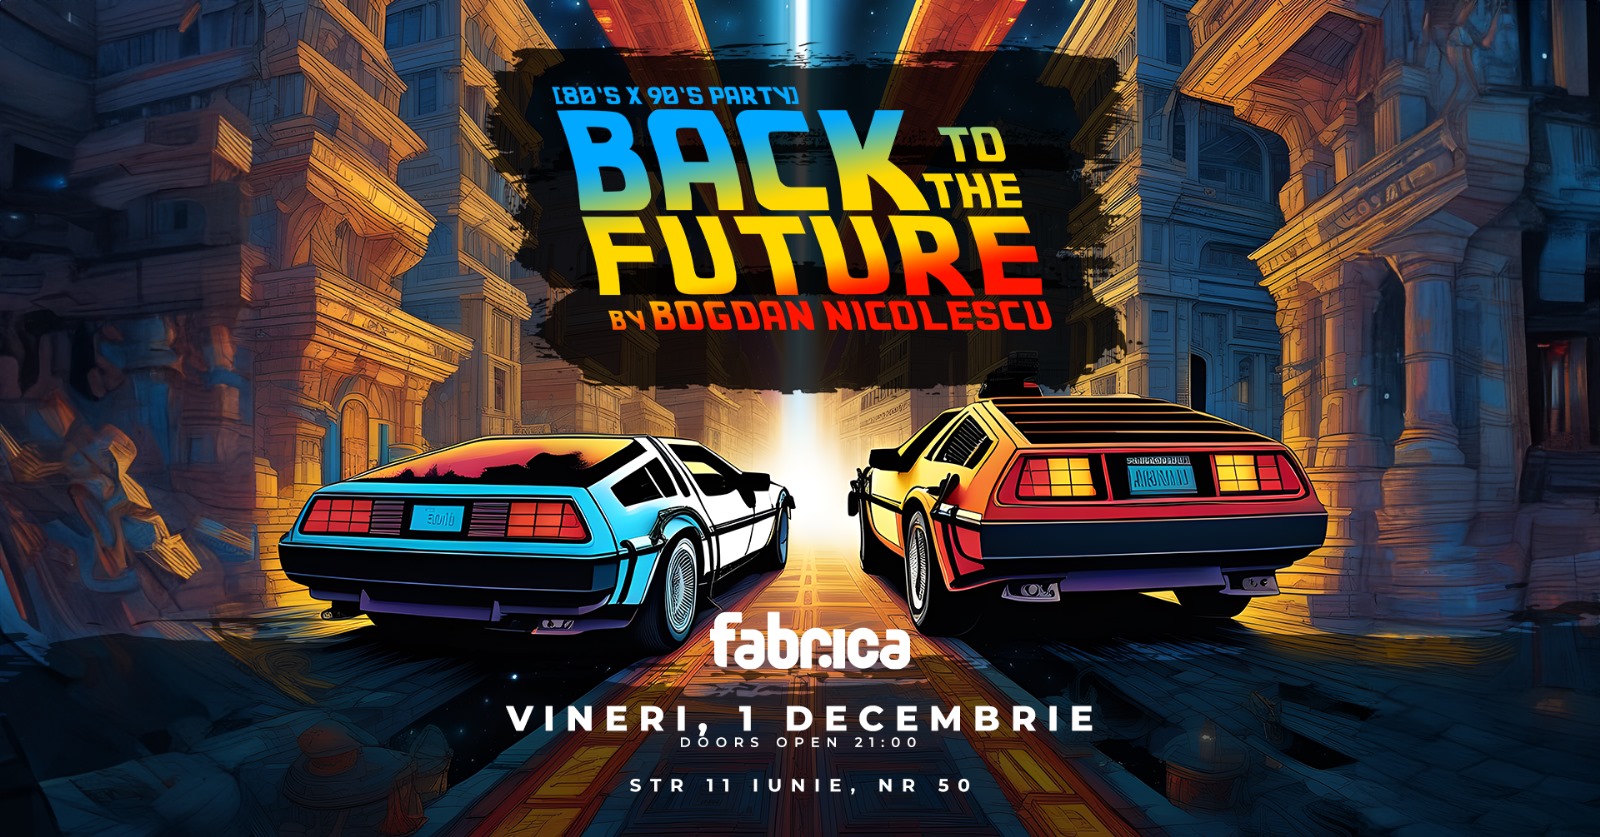 Back To The Future (80's & 90's Party)